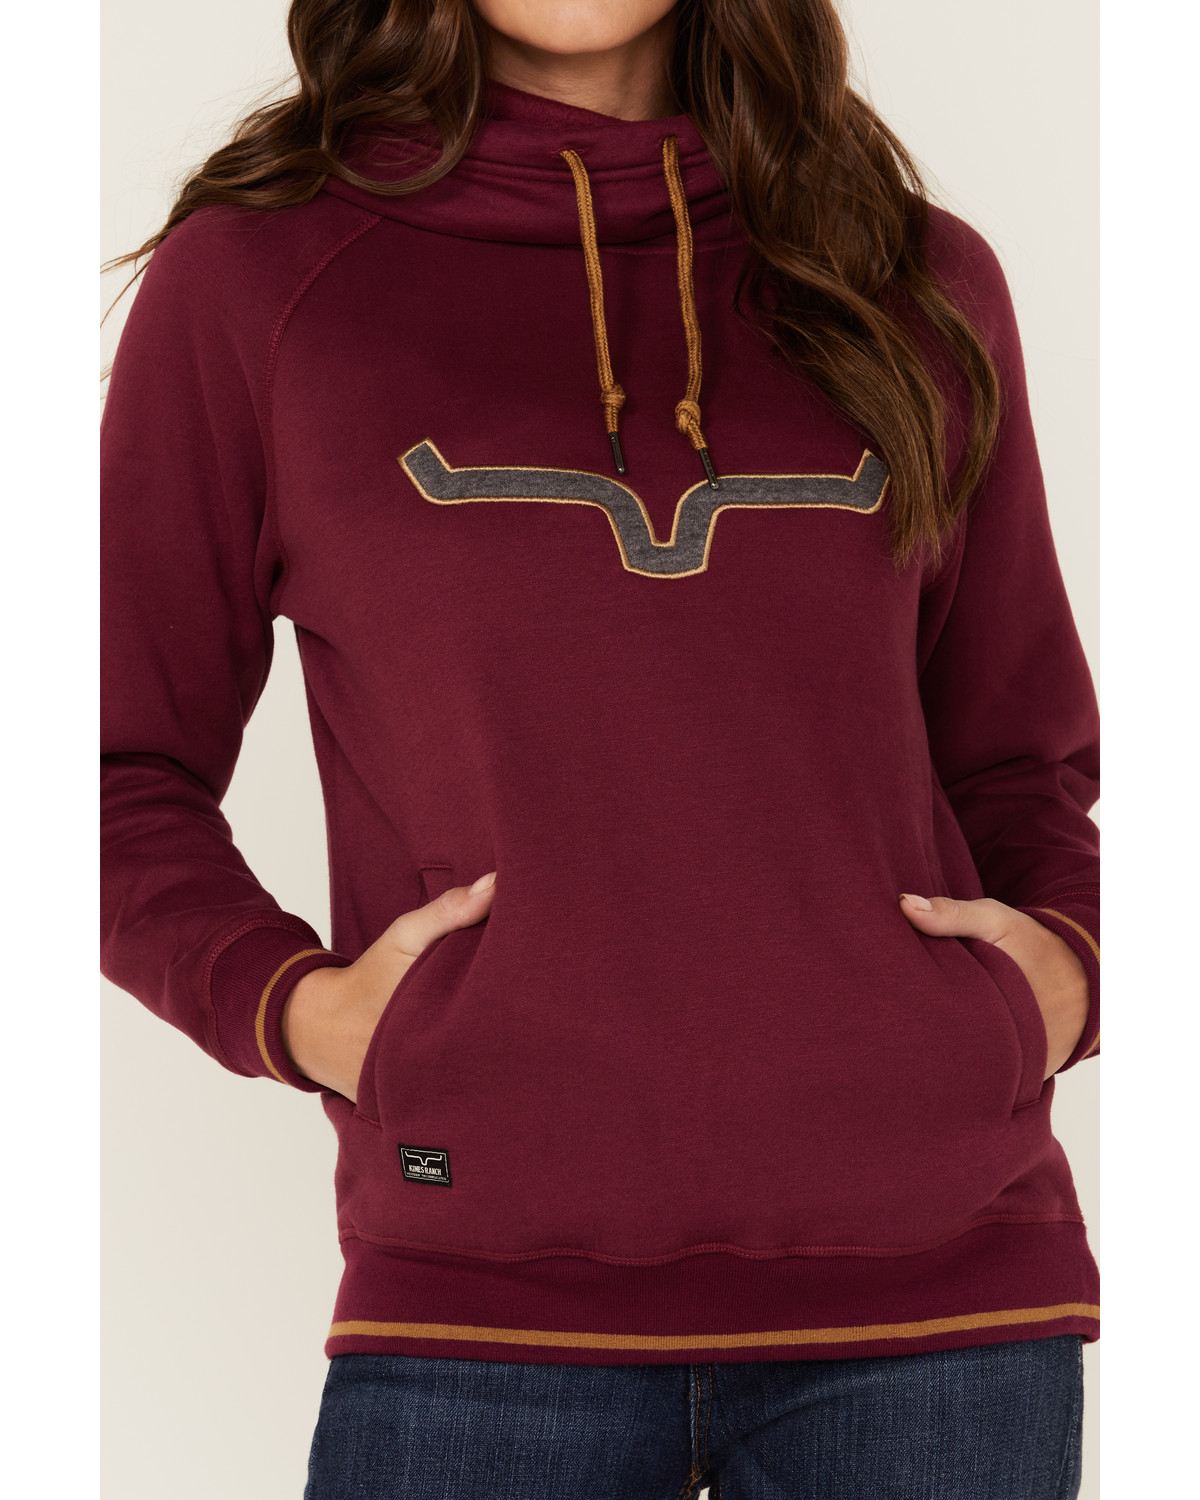 Kimes Ranch Women's Two-Scoops Logo Hoodie Sweatshirt - Country Outfitter